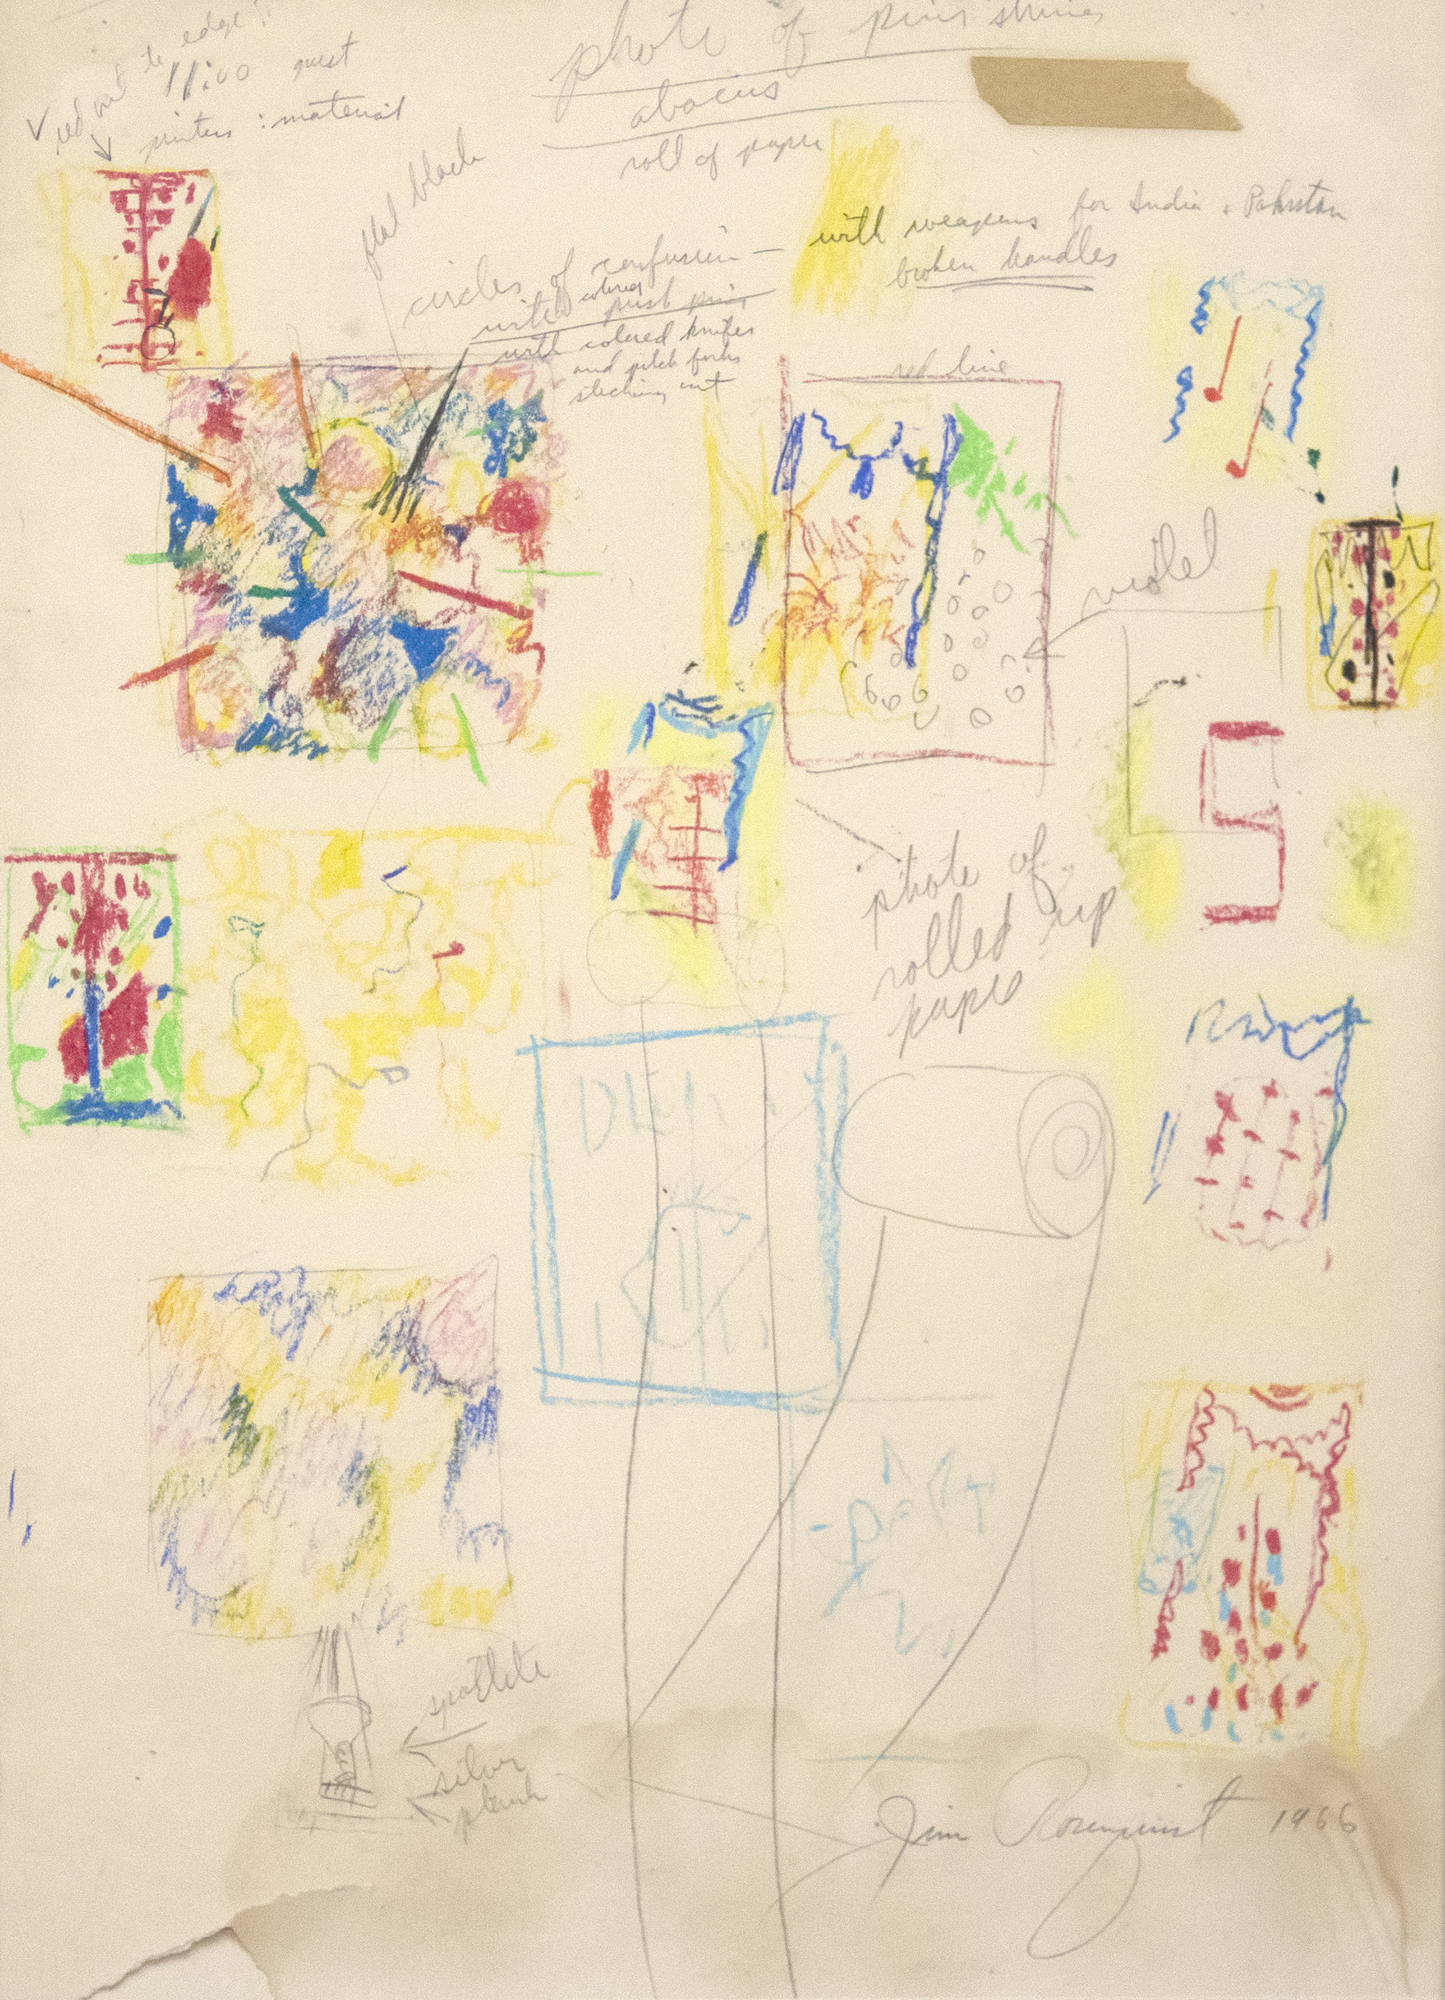 JAMES ROSENQUIST - Drawing Study - oil pastel and pencil on paper - 35 x 22 1/2 in.